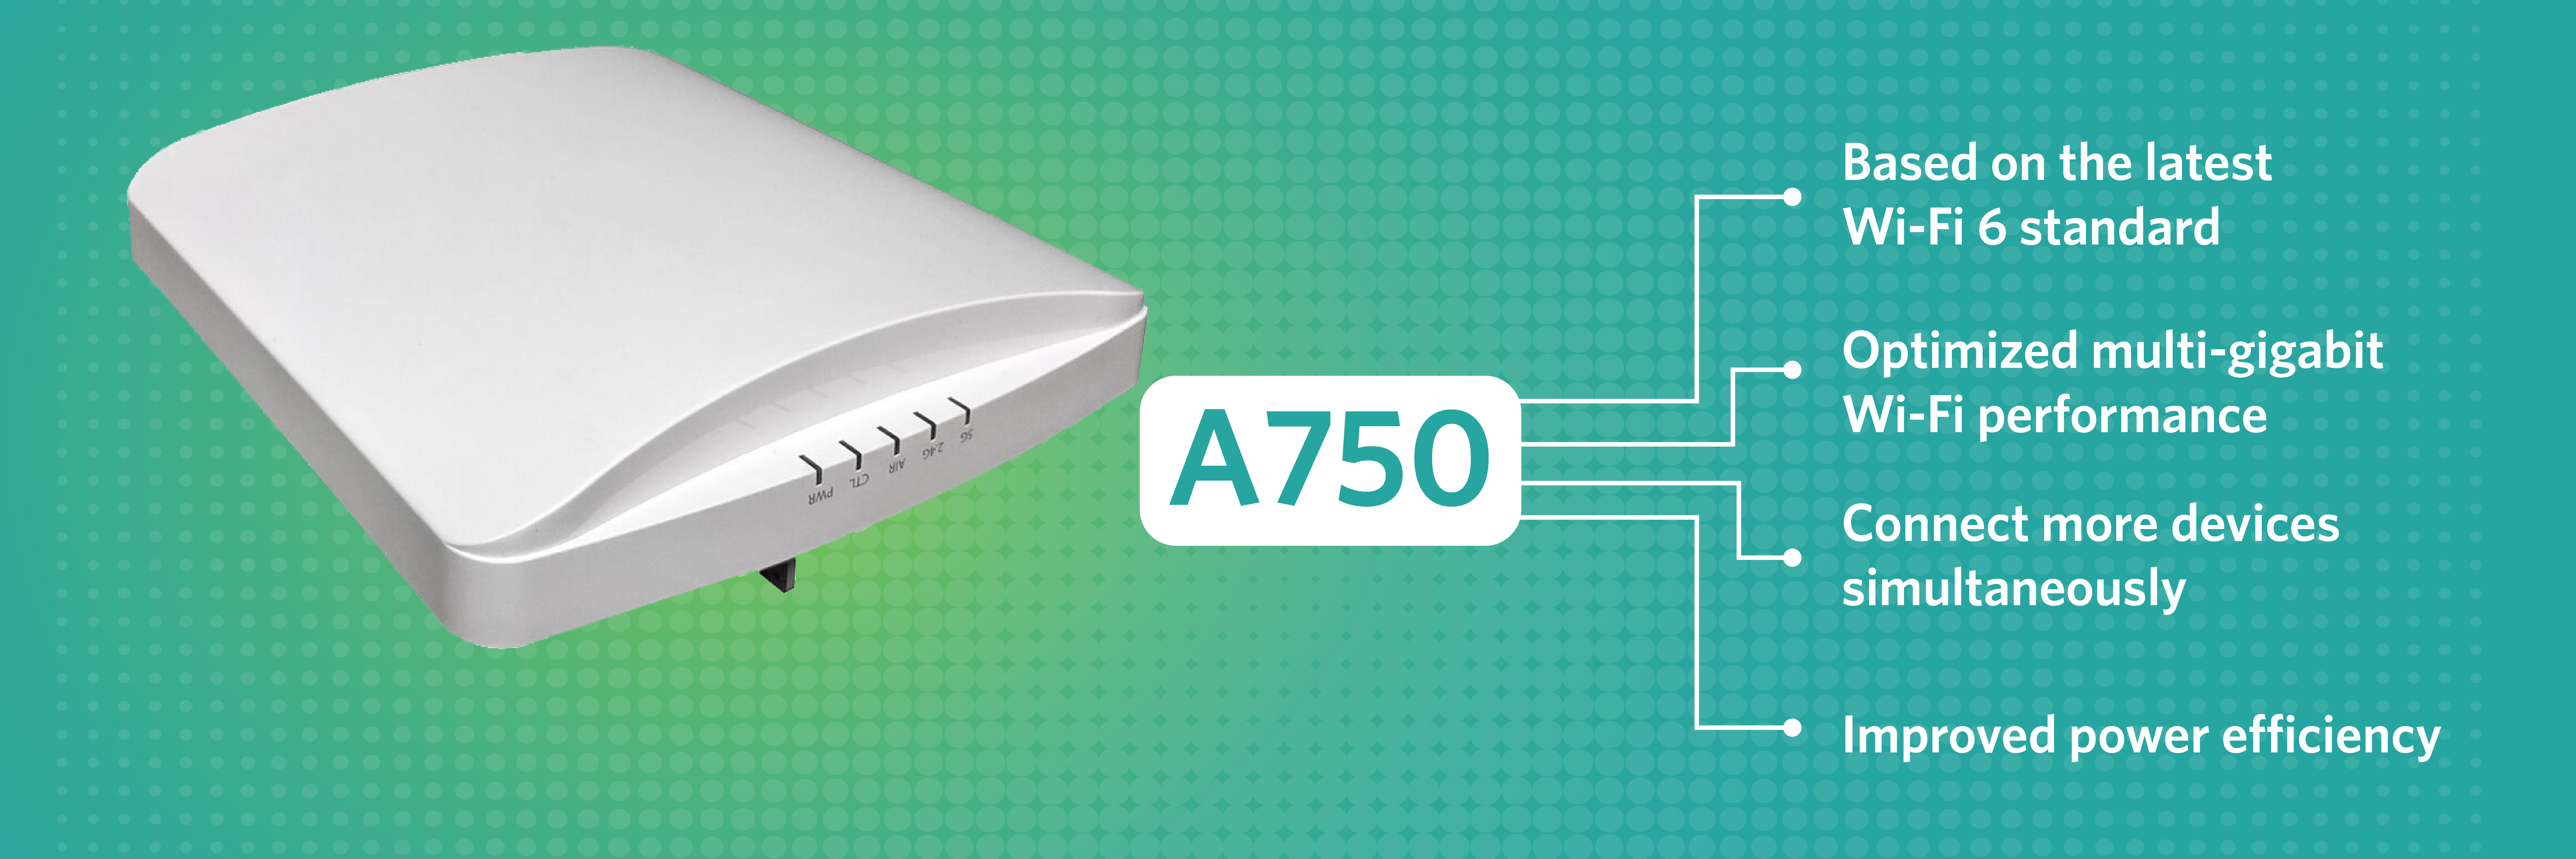 A750 - Wi-Fi 6 Certified Access Point